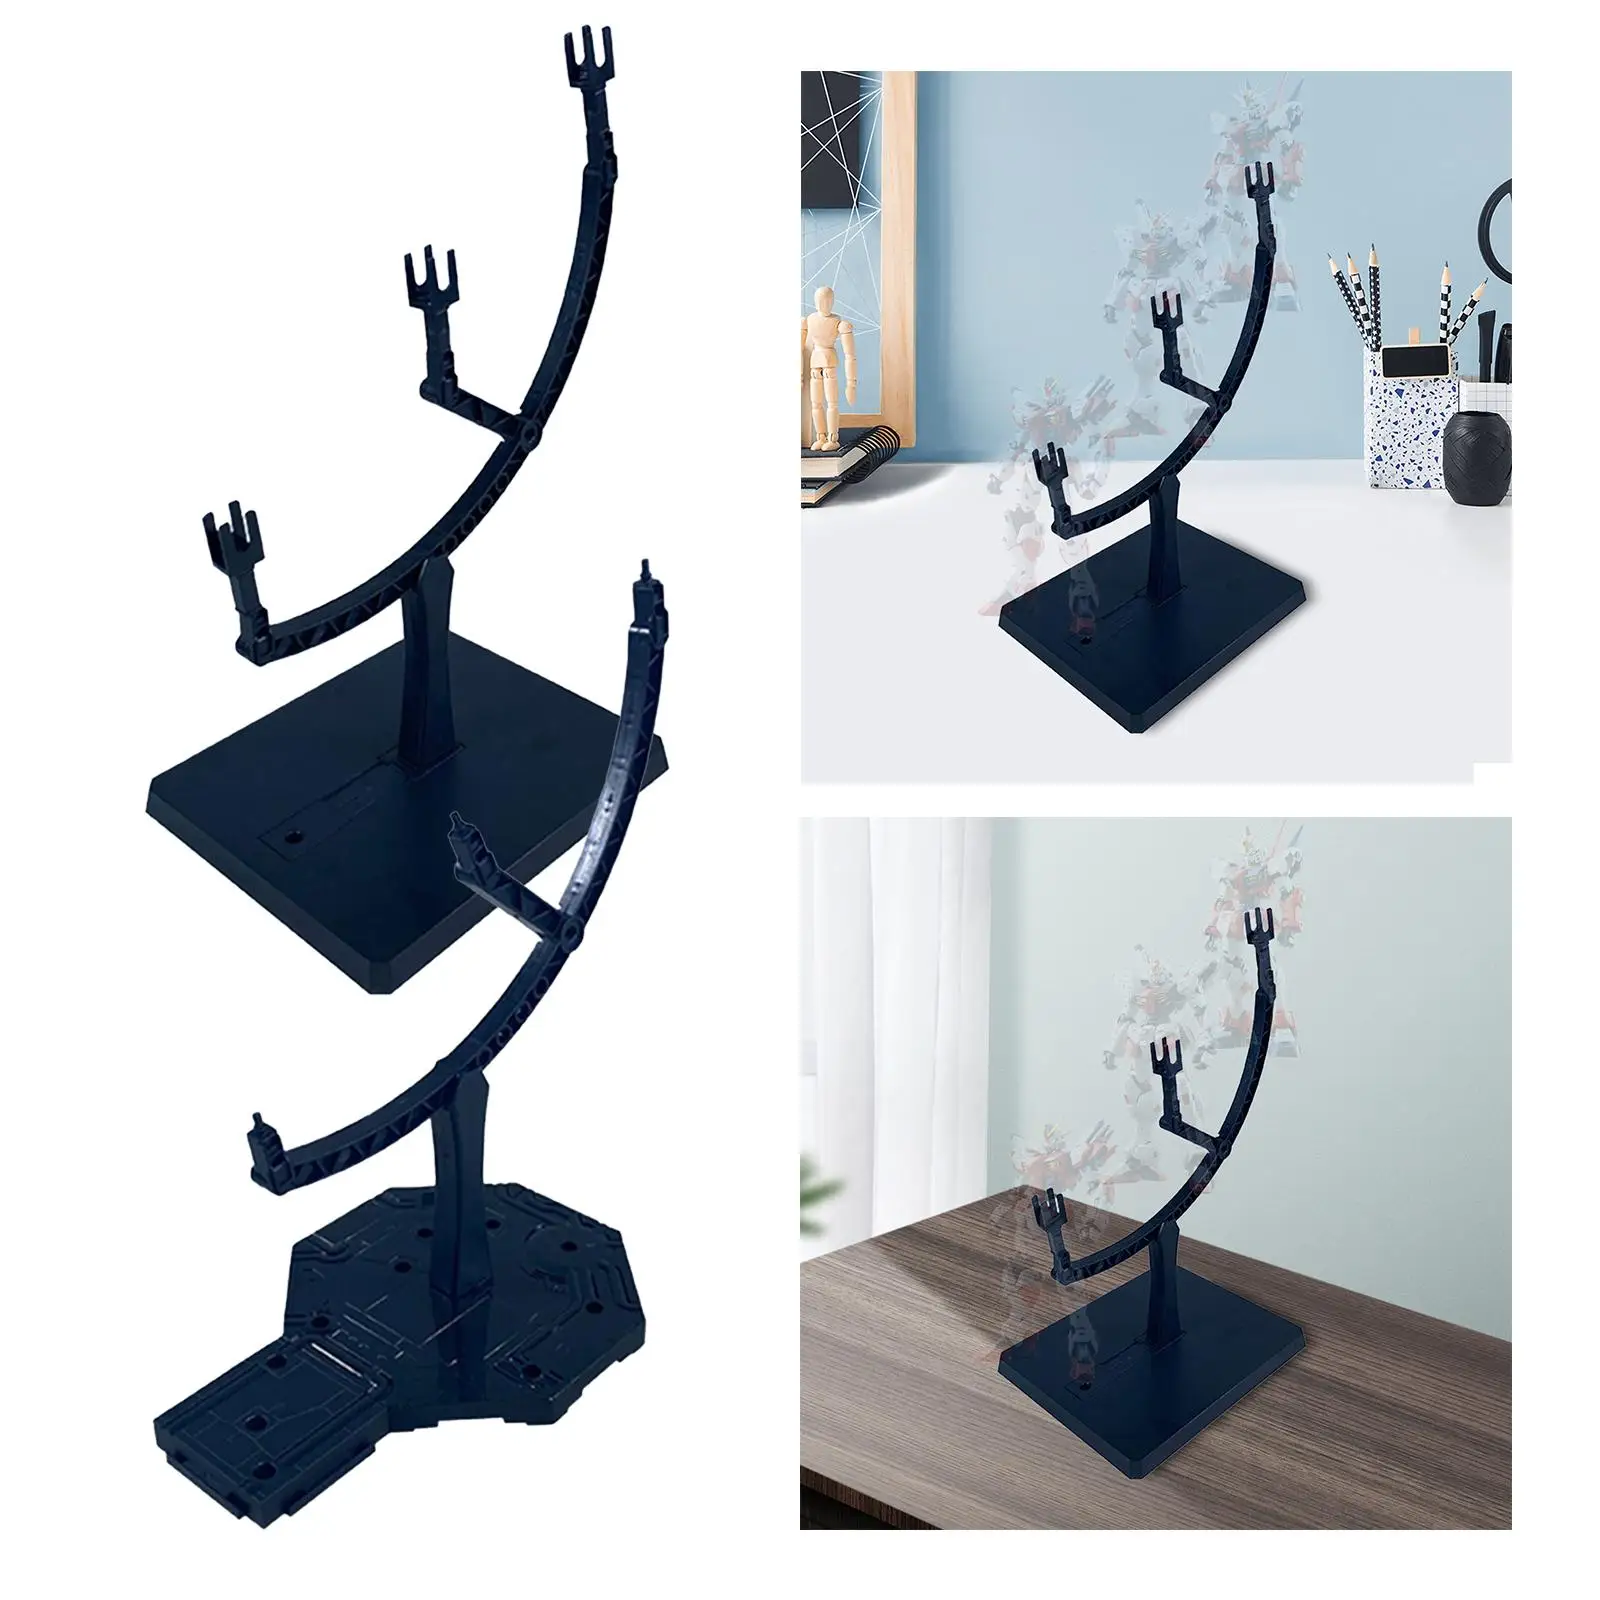 Action Figure Display Rack DIY Action Figure Stands Lightweight Sturdy Support for Hg MG Shelf Tabletop Ornament